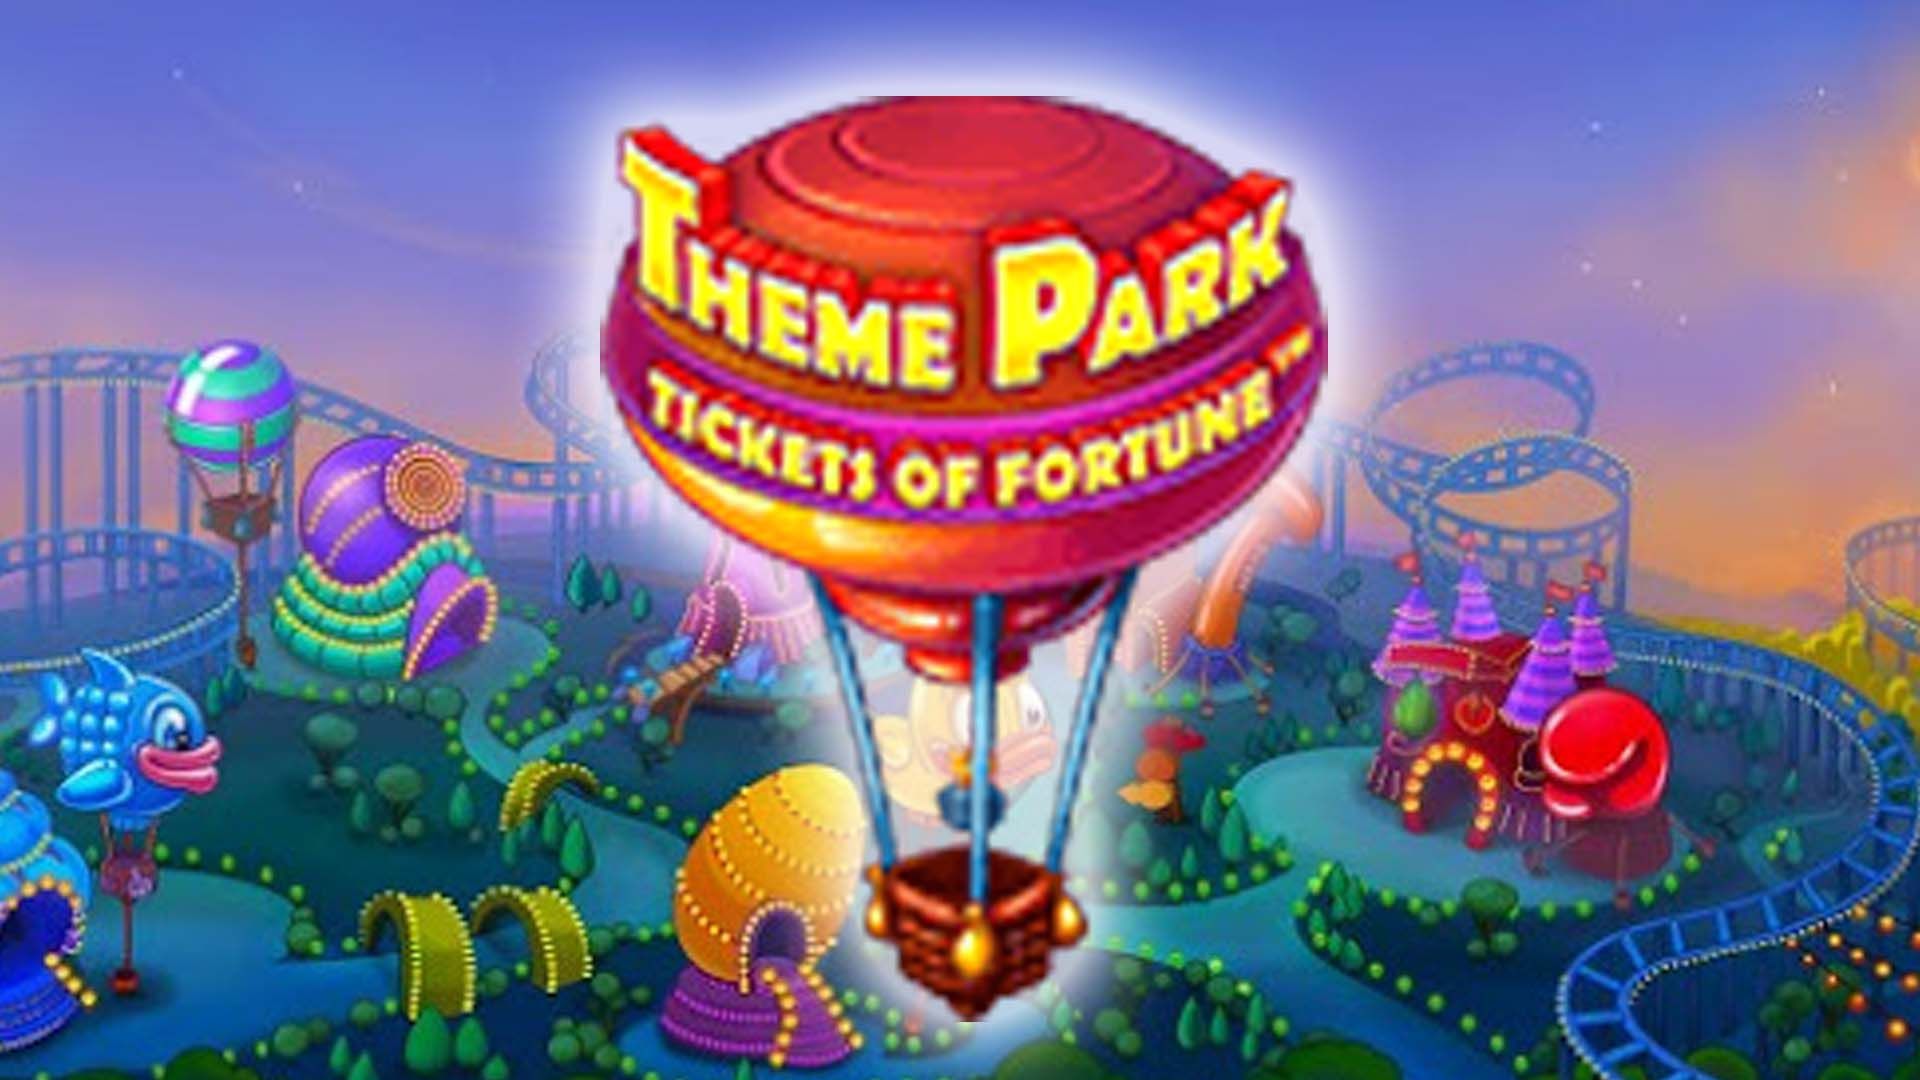 Slot machine Theme Park Tickets Of Fortune